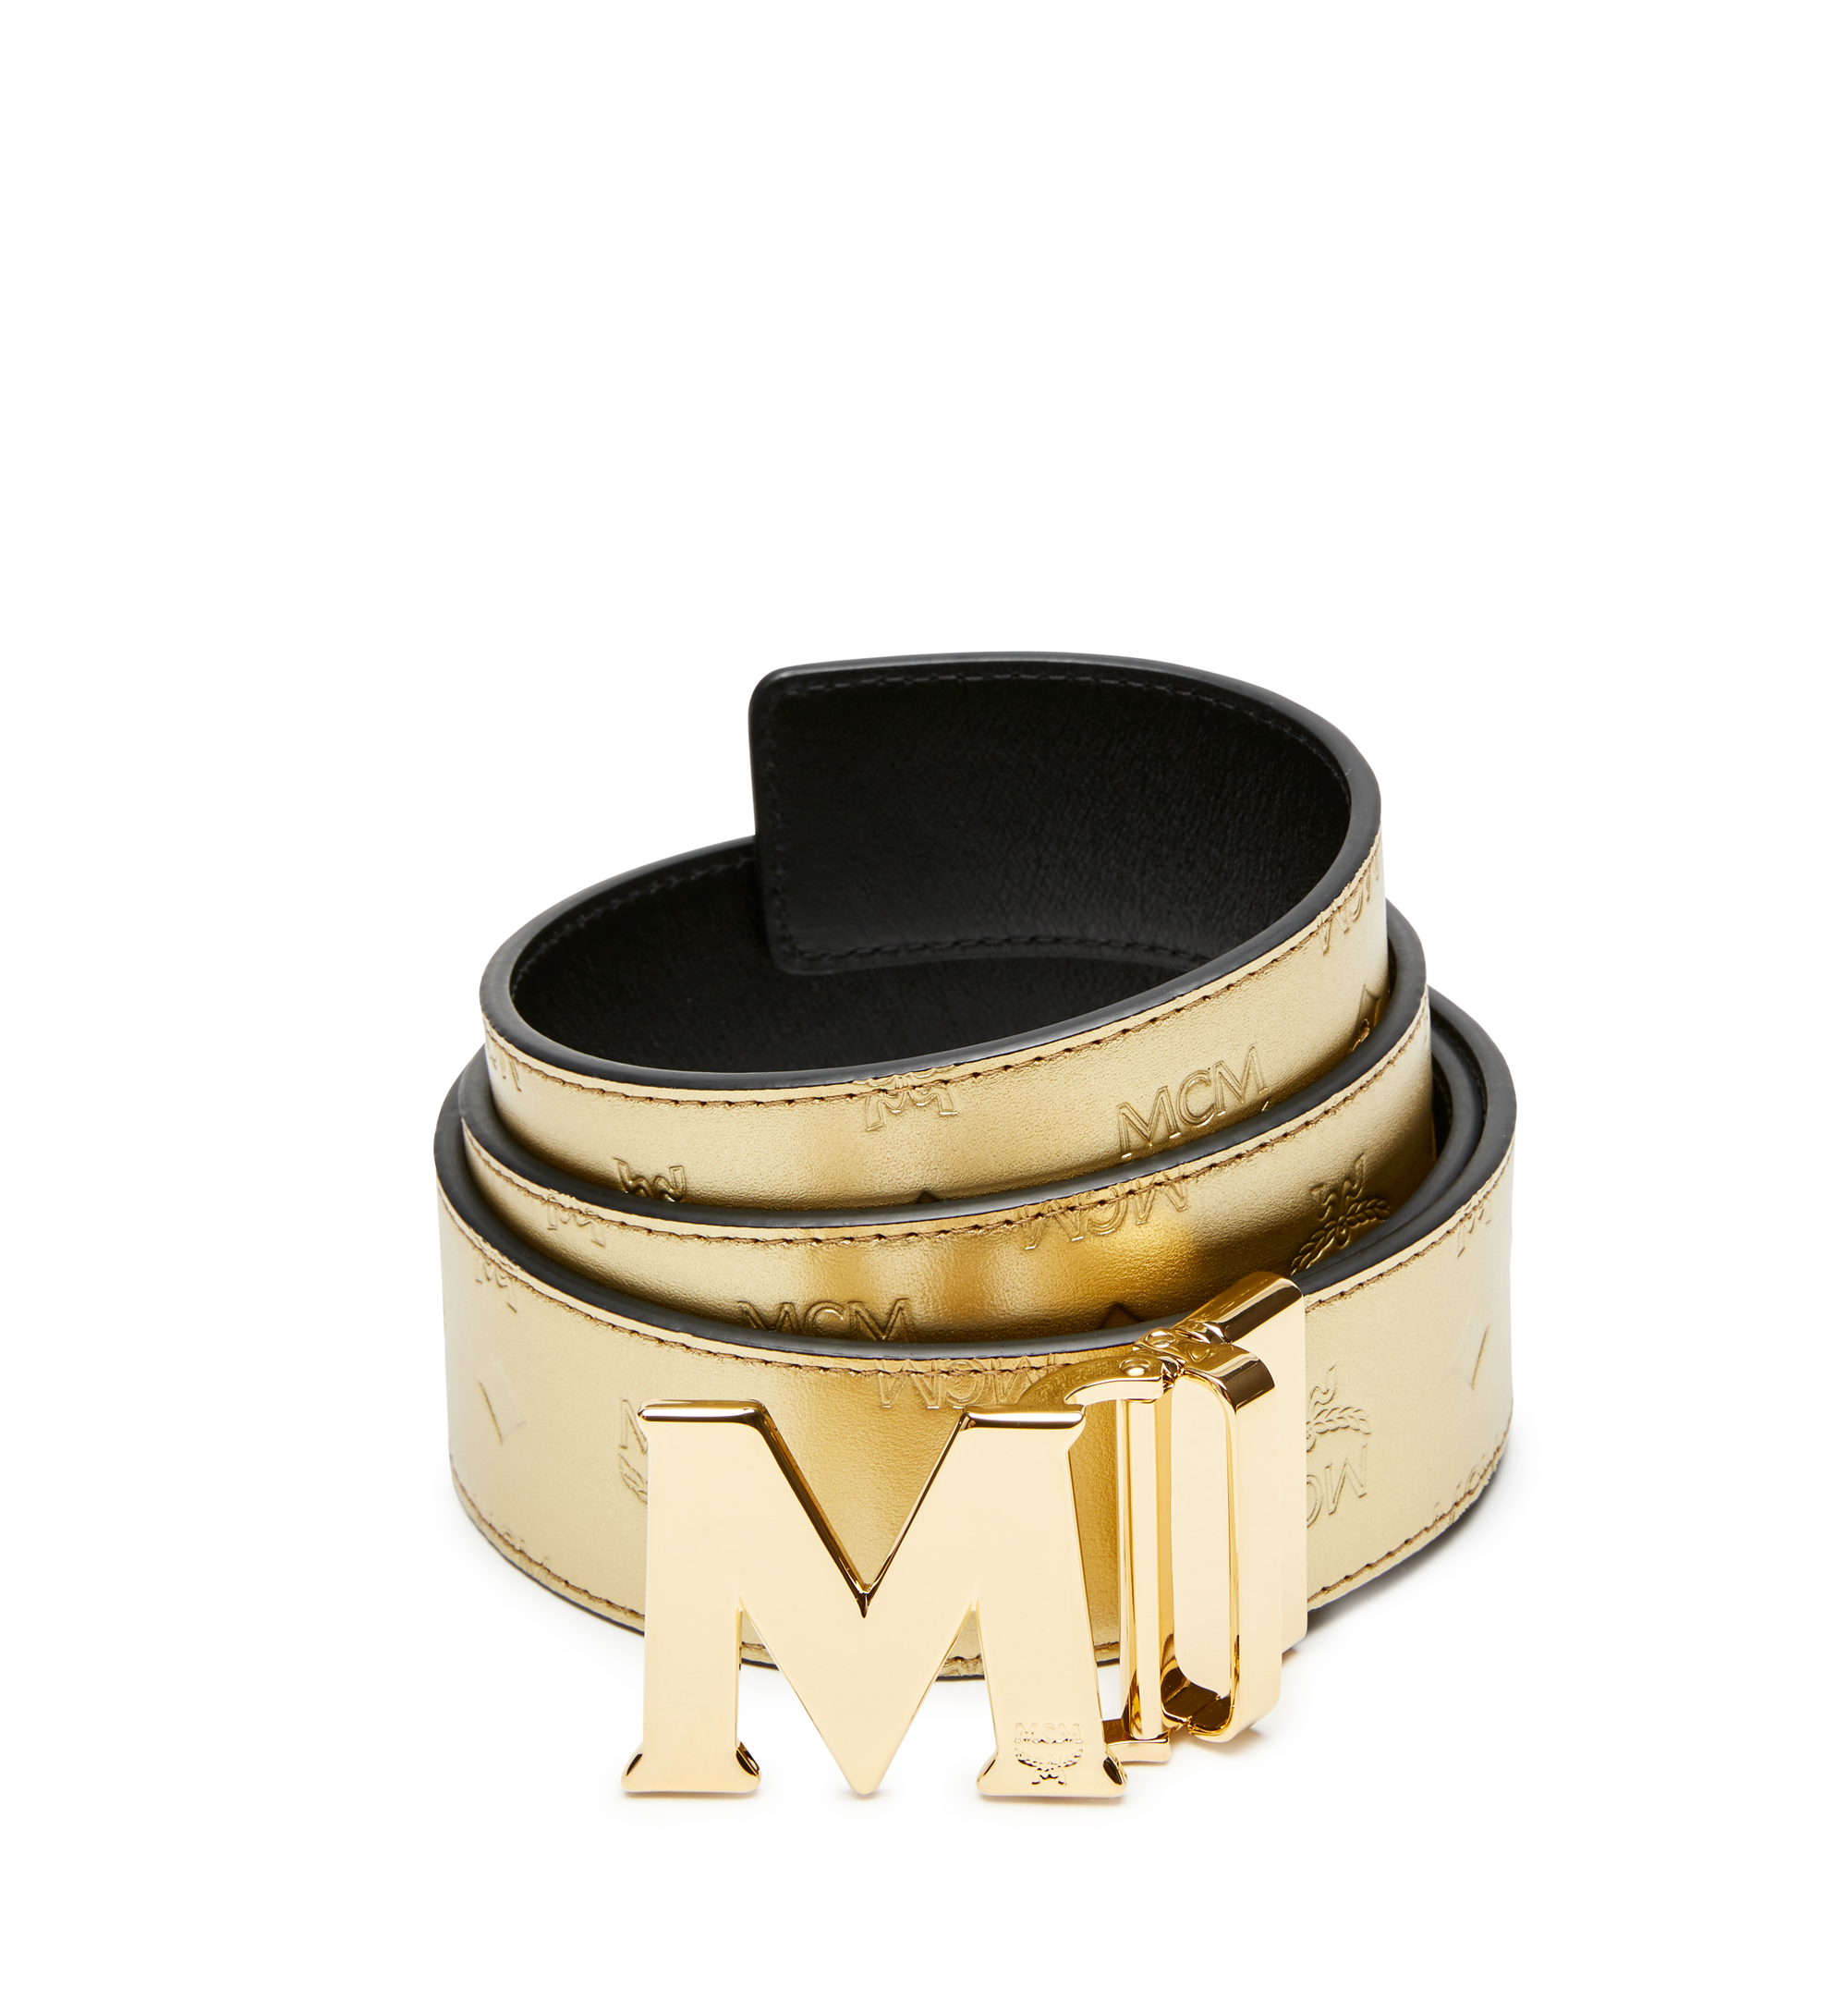 Mcm Belt Gold Buckle / Widest selection of new season & sale only at ...